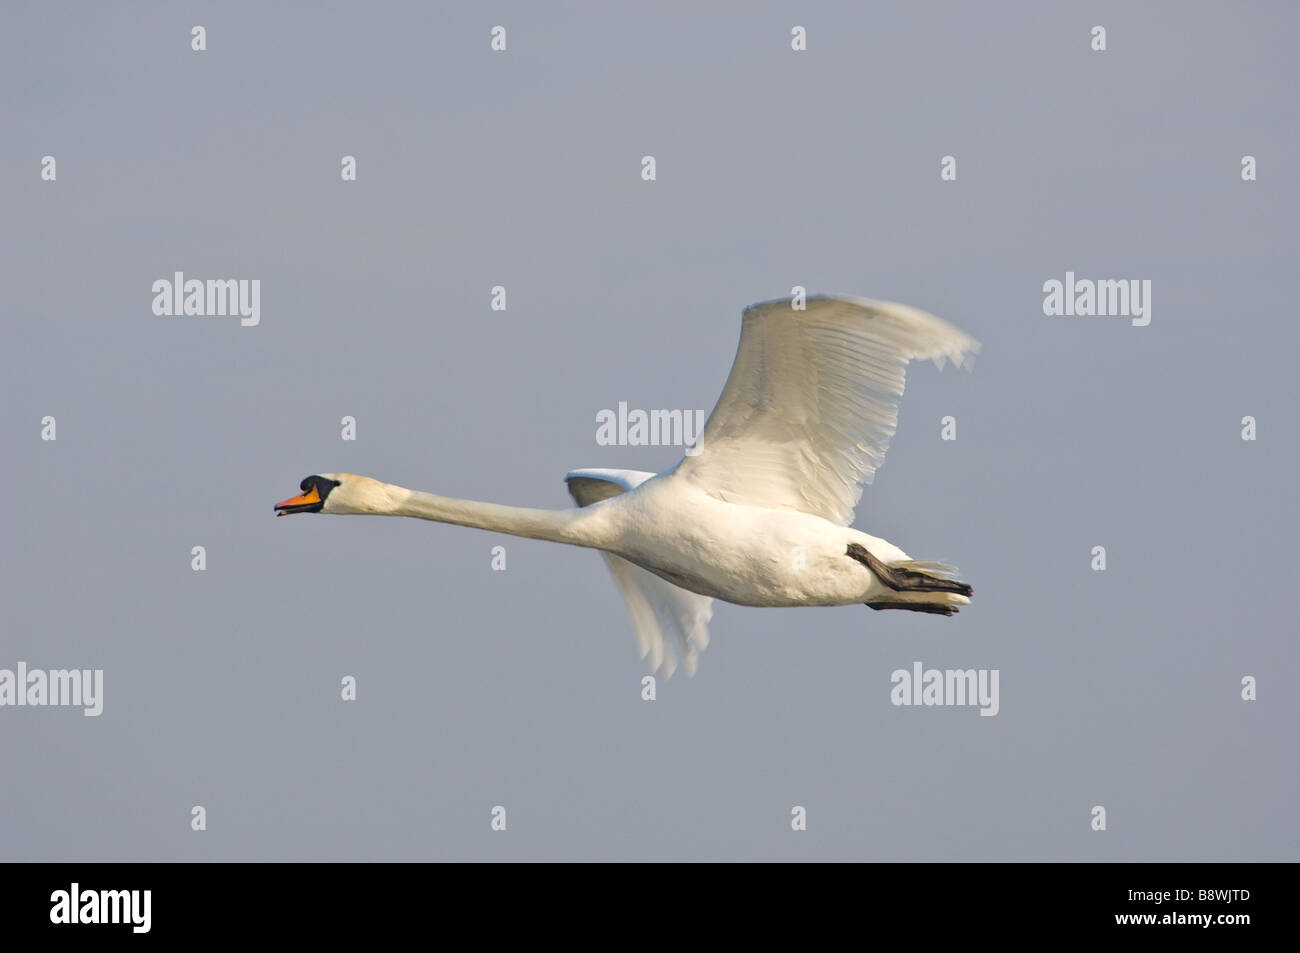 Adult Mute swan flying with its wings out spread. Stock Photo